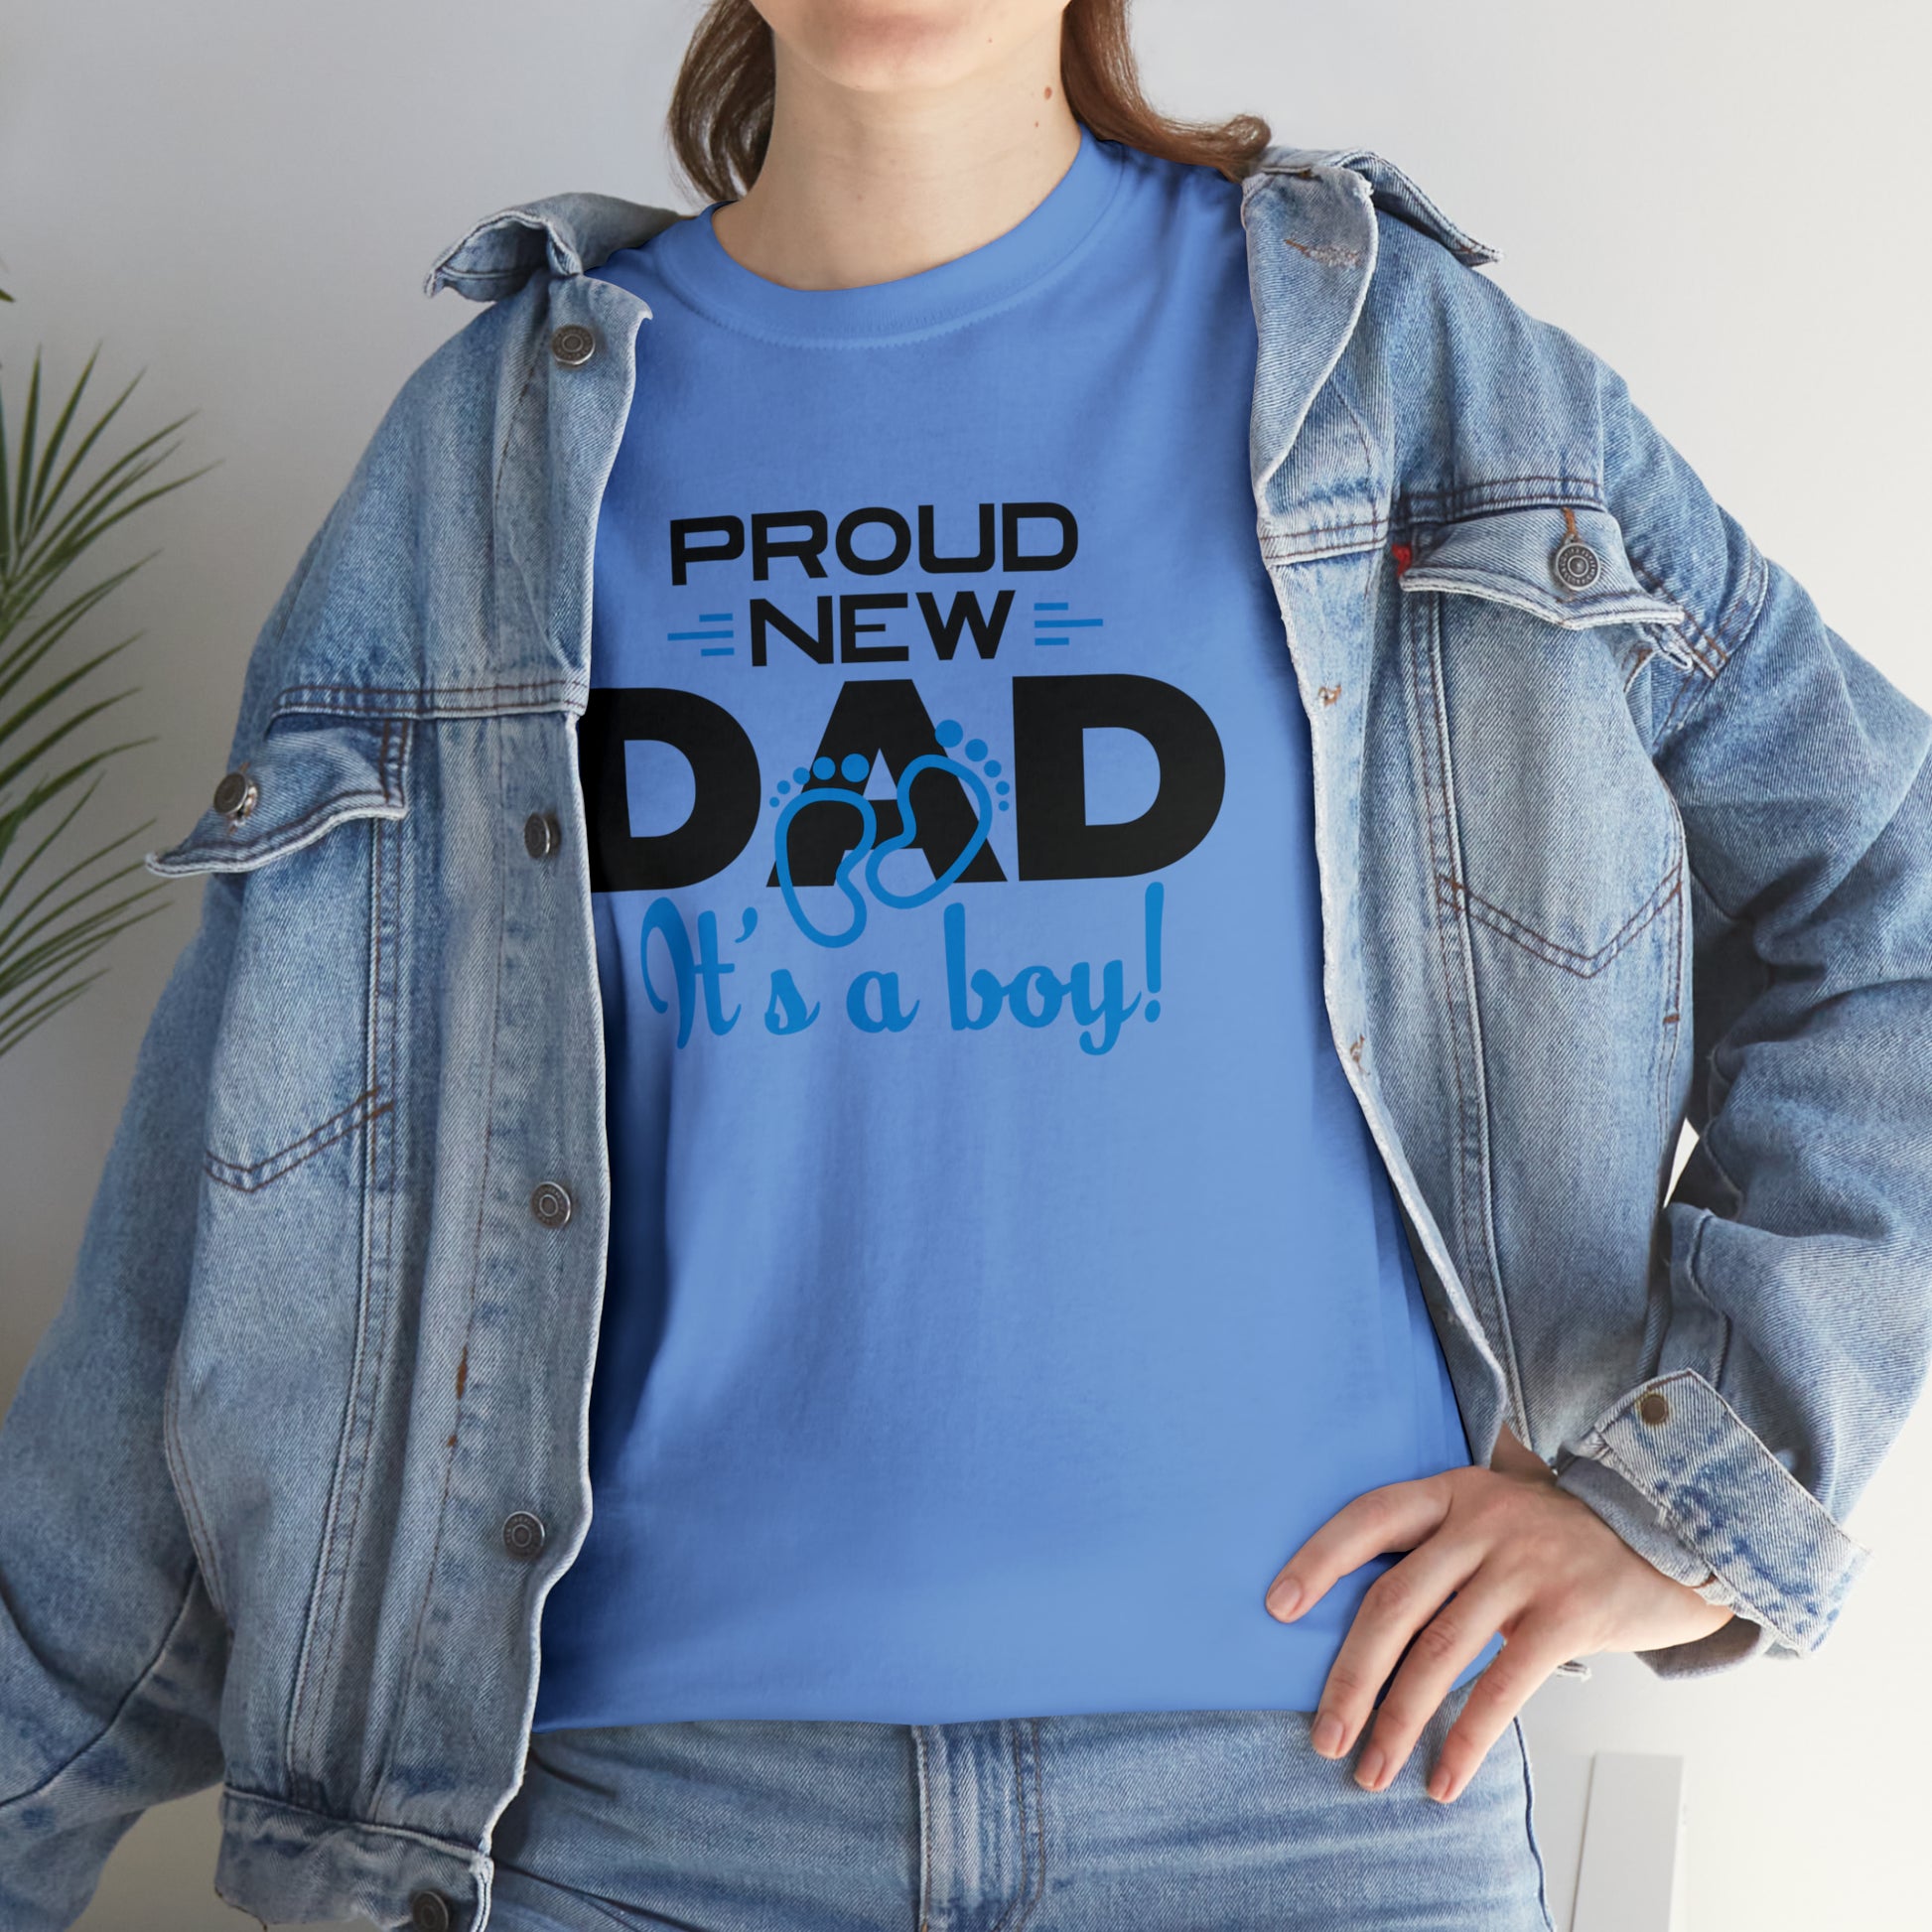 "New Boy Dad" T-Shirt - Weave Got Gifts - Unique Gifts You Won’t Find Anywhere Else!